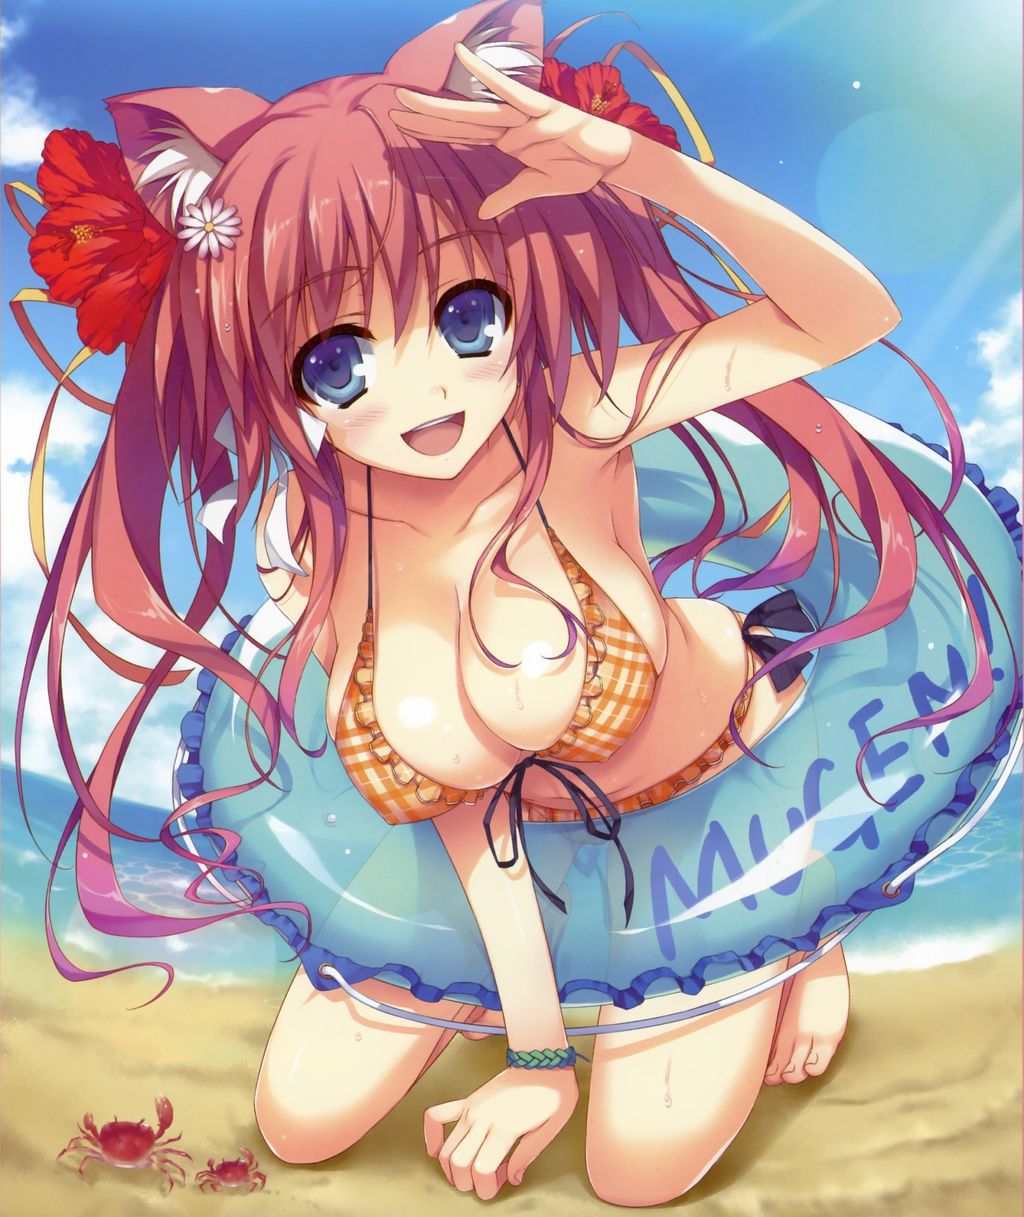 Swimsuit erotic image of the girl carefully selected [secondary swimsuit] Part 50 11